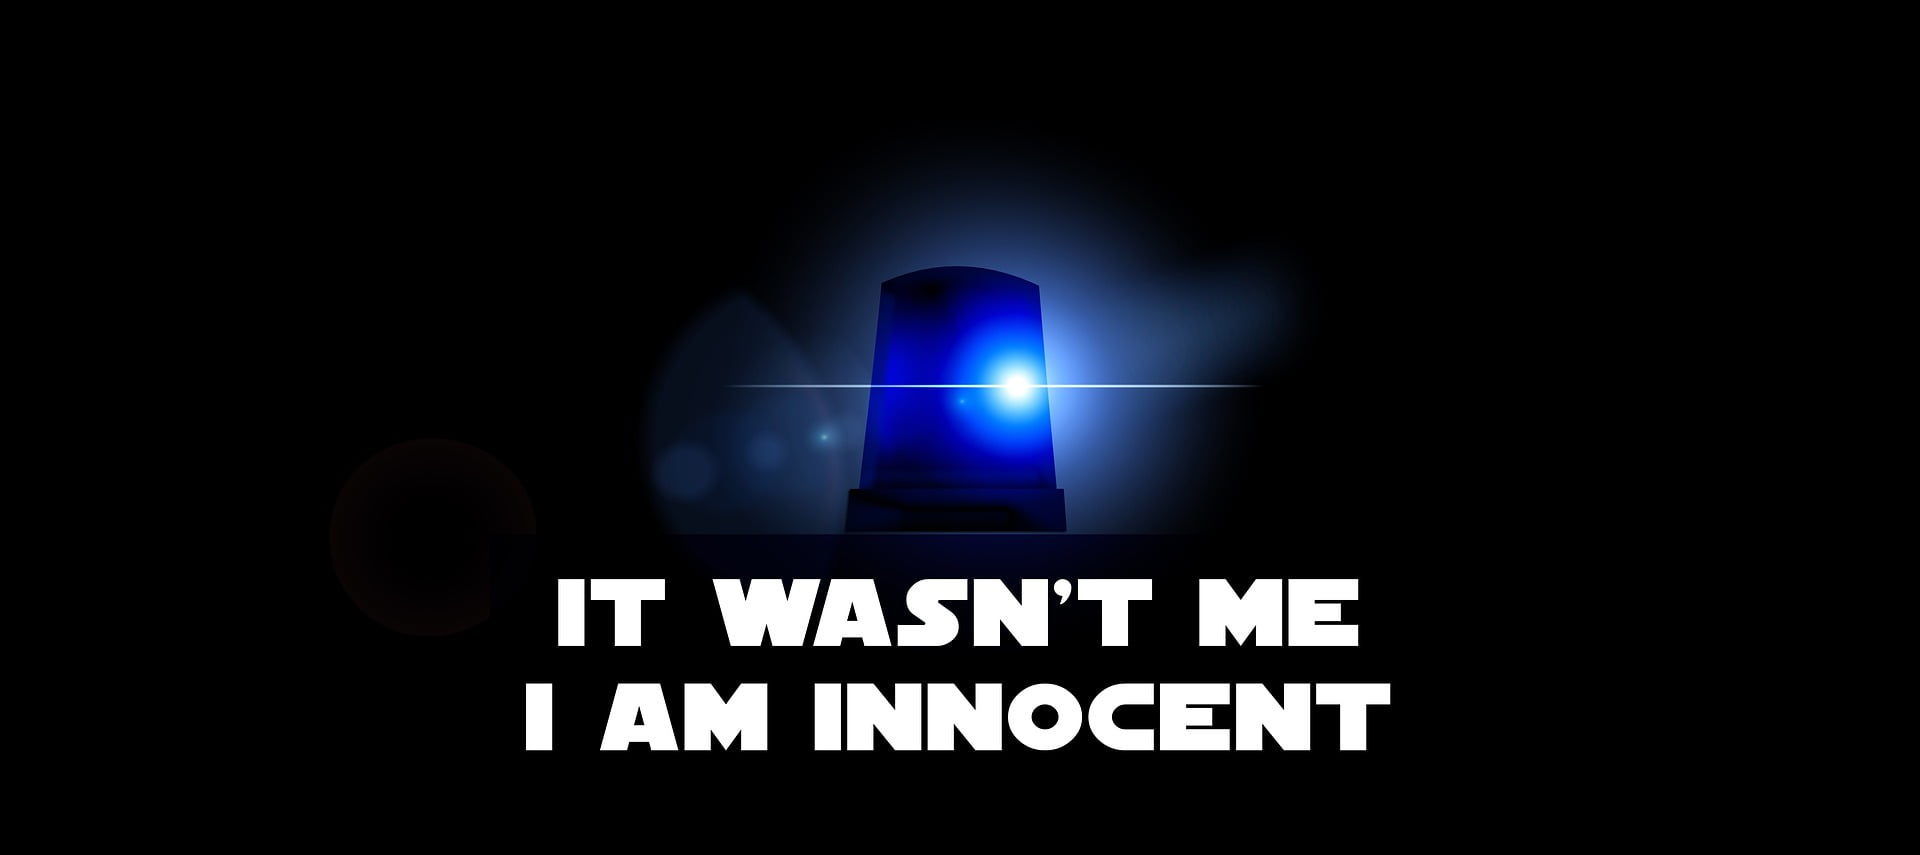 it wasn't me I am innocent text with blue light